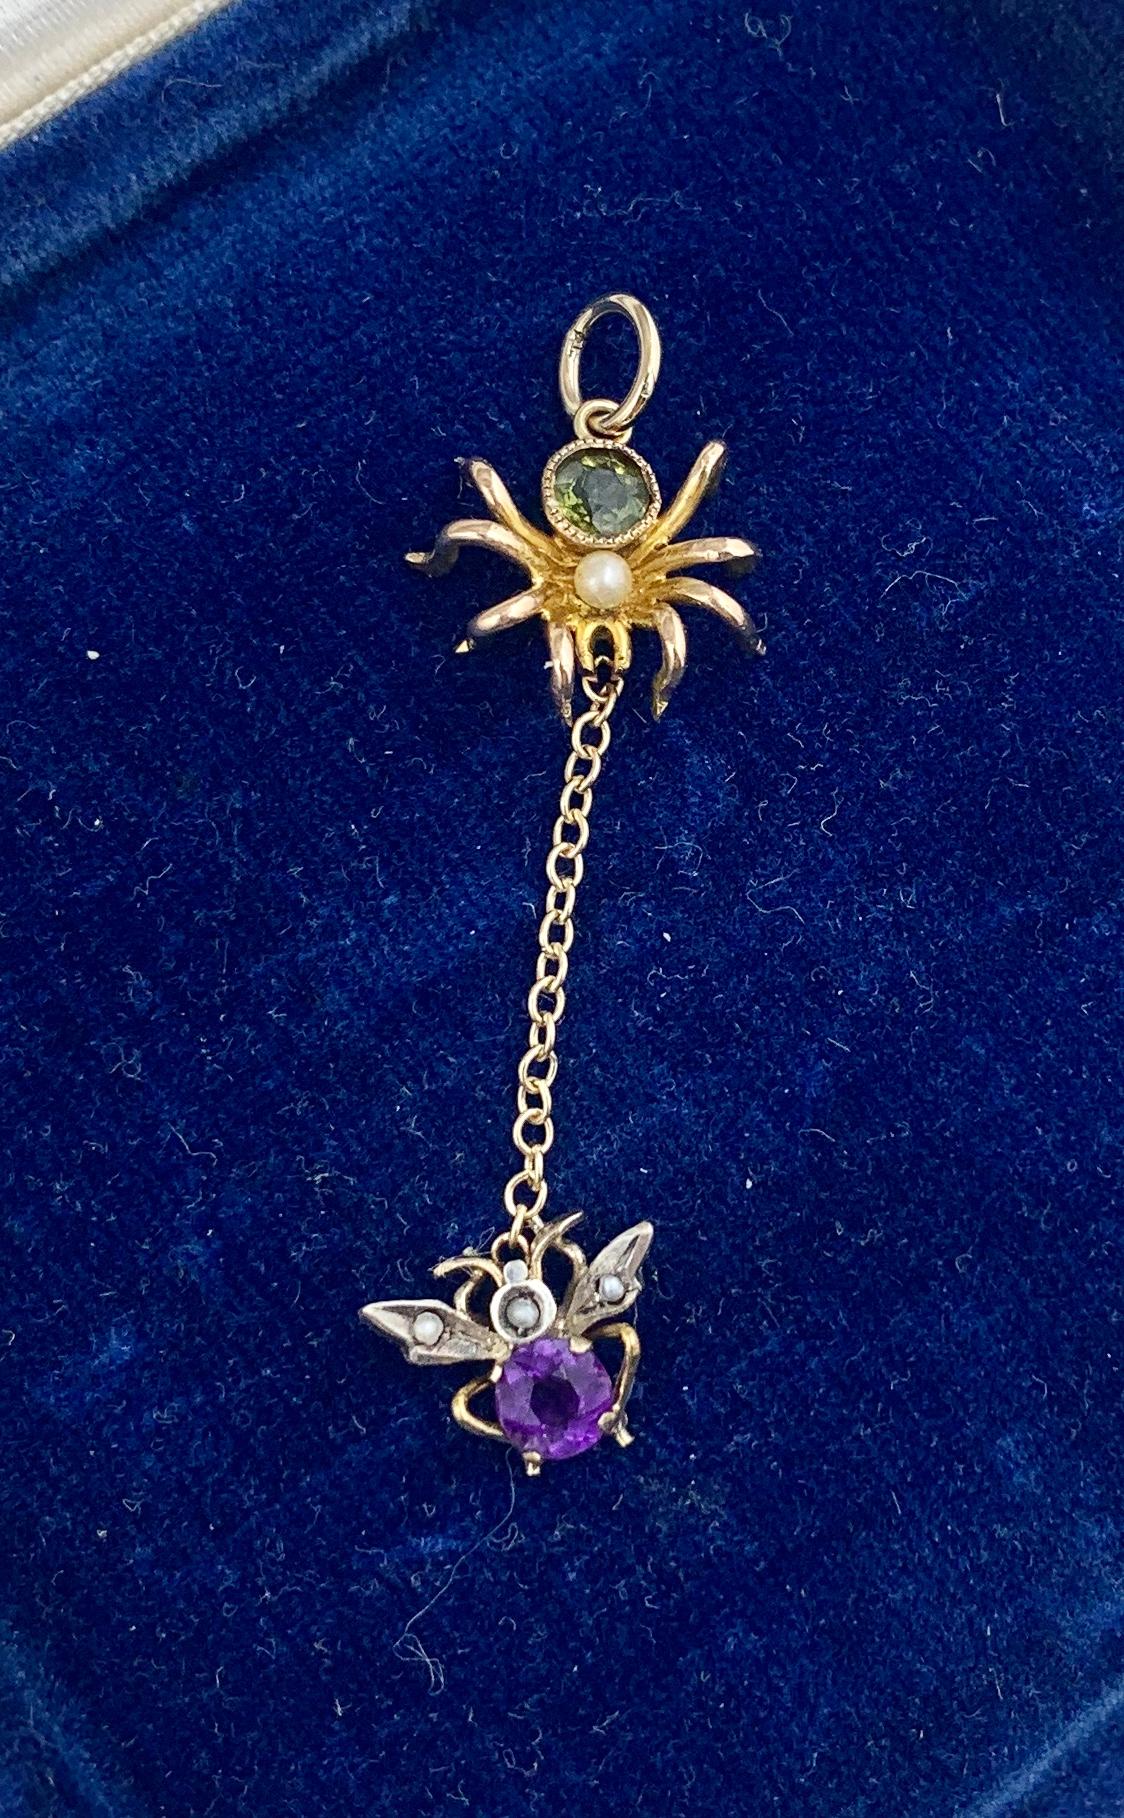 A stunning and rare antique Edwardian Spider and Fly Pendant set with gorgeous green Peridot and purple Amethyst gems in 9 Karat Gold.  Purple and Green are the Suffragette colors and the pendant dates to the Suffragette period.  What a fabulous